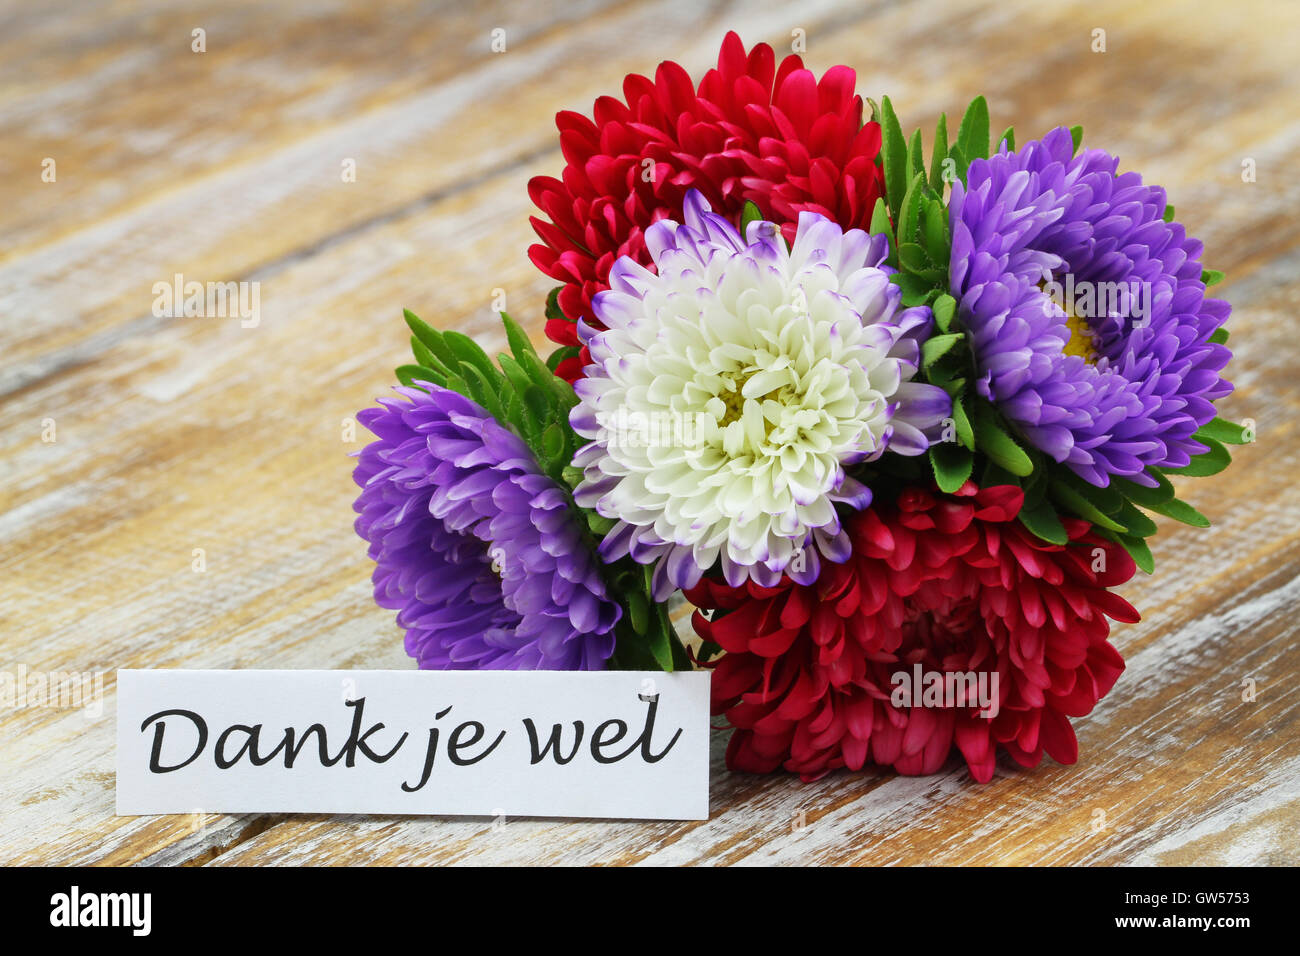 Dank je wel (thank you in Dutch) card with colorful aster flower bouquet on rustic wooden surface Stock Photo